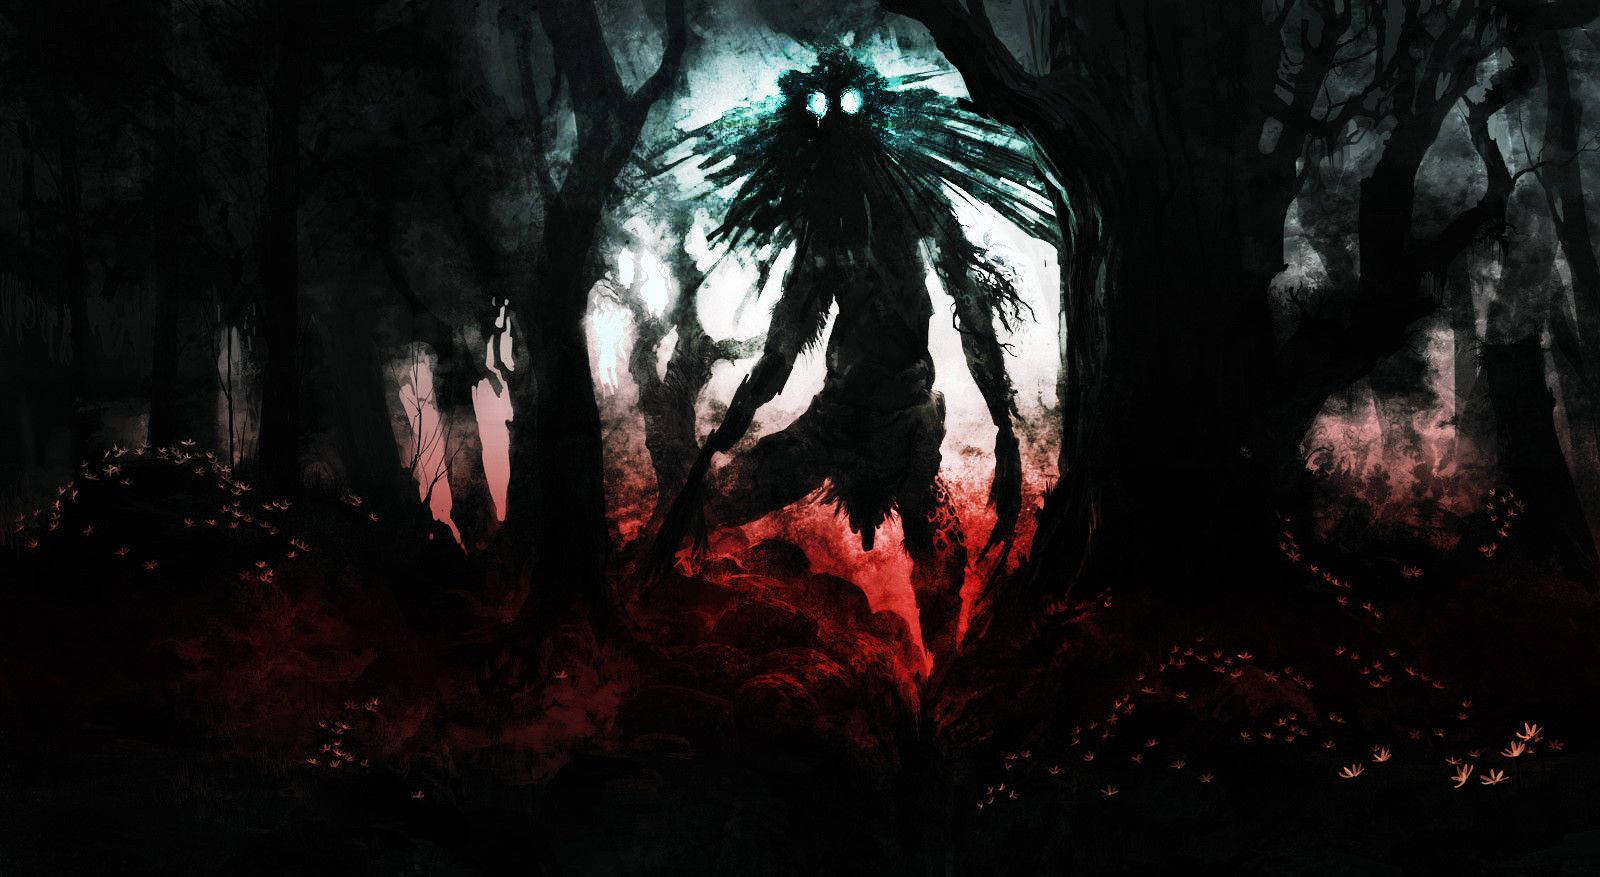 Lost and Lonely in the Creepy Forest Wallpaper